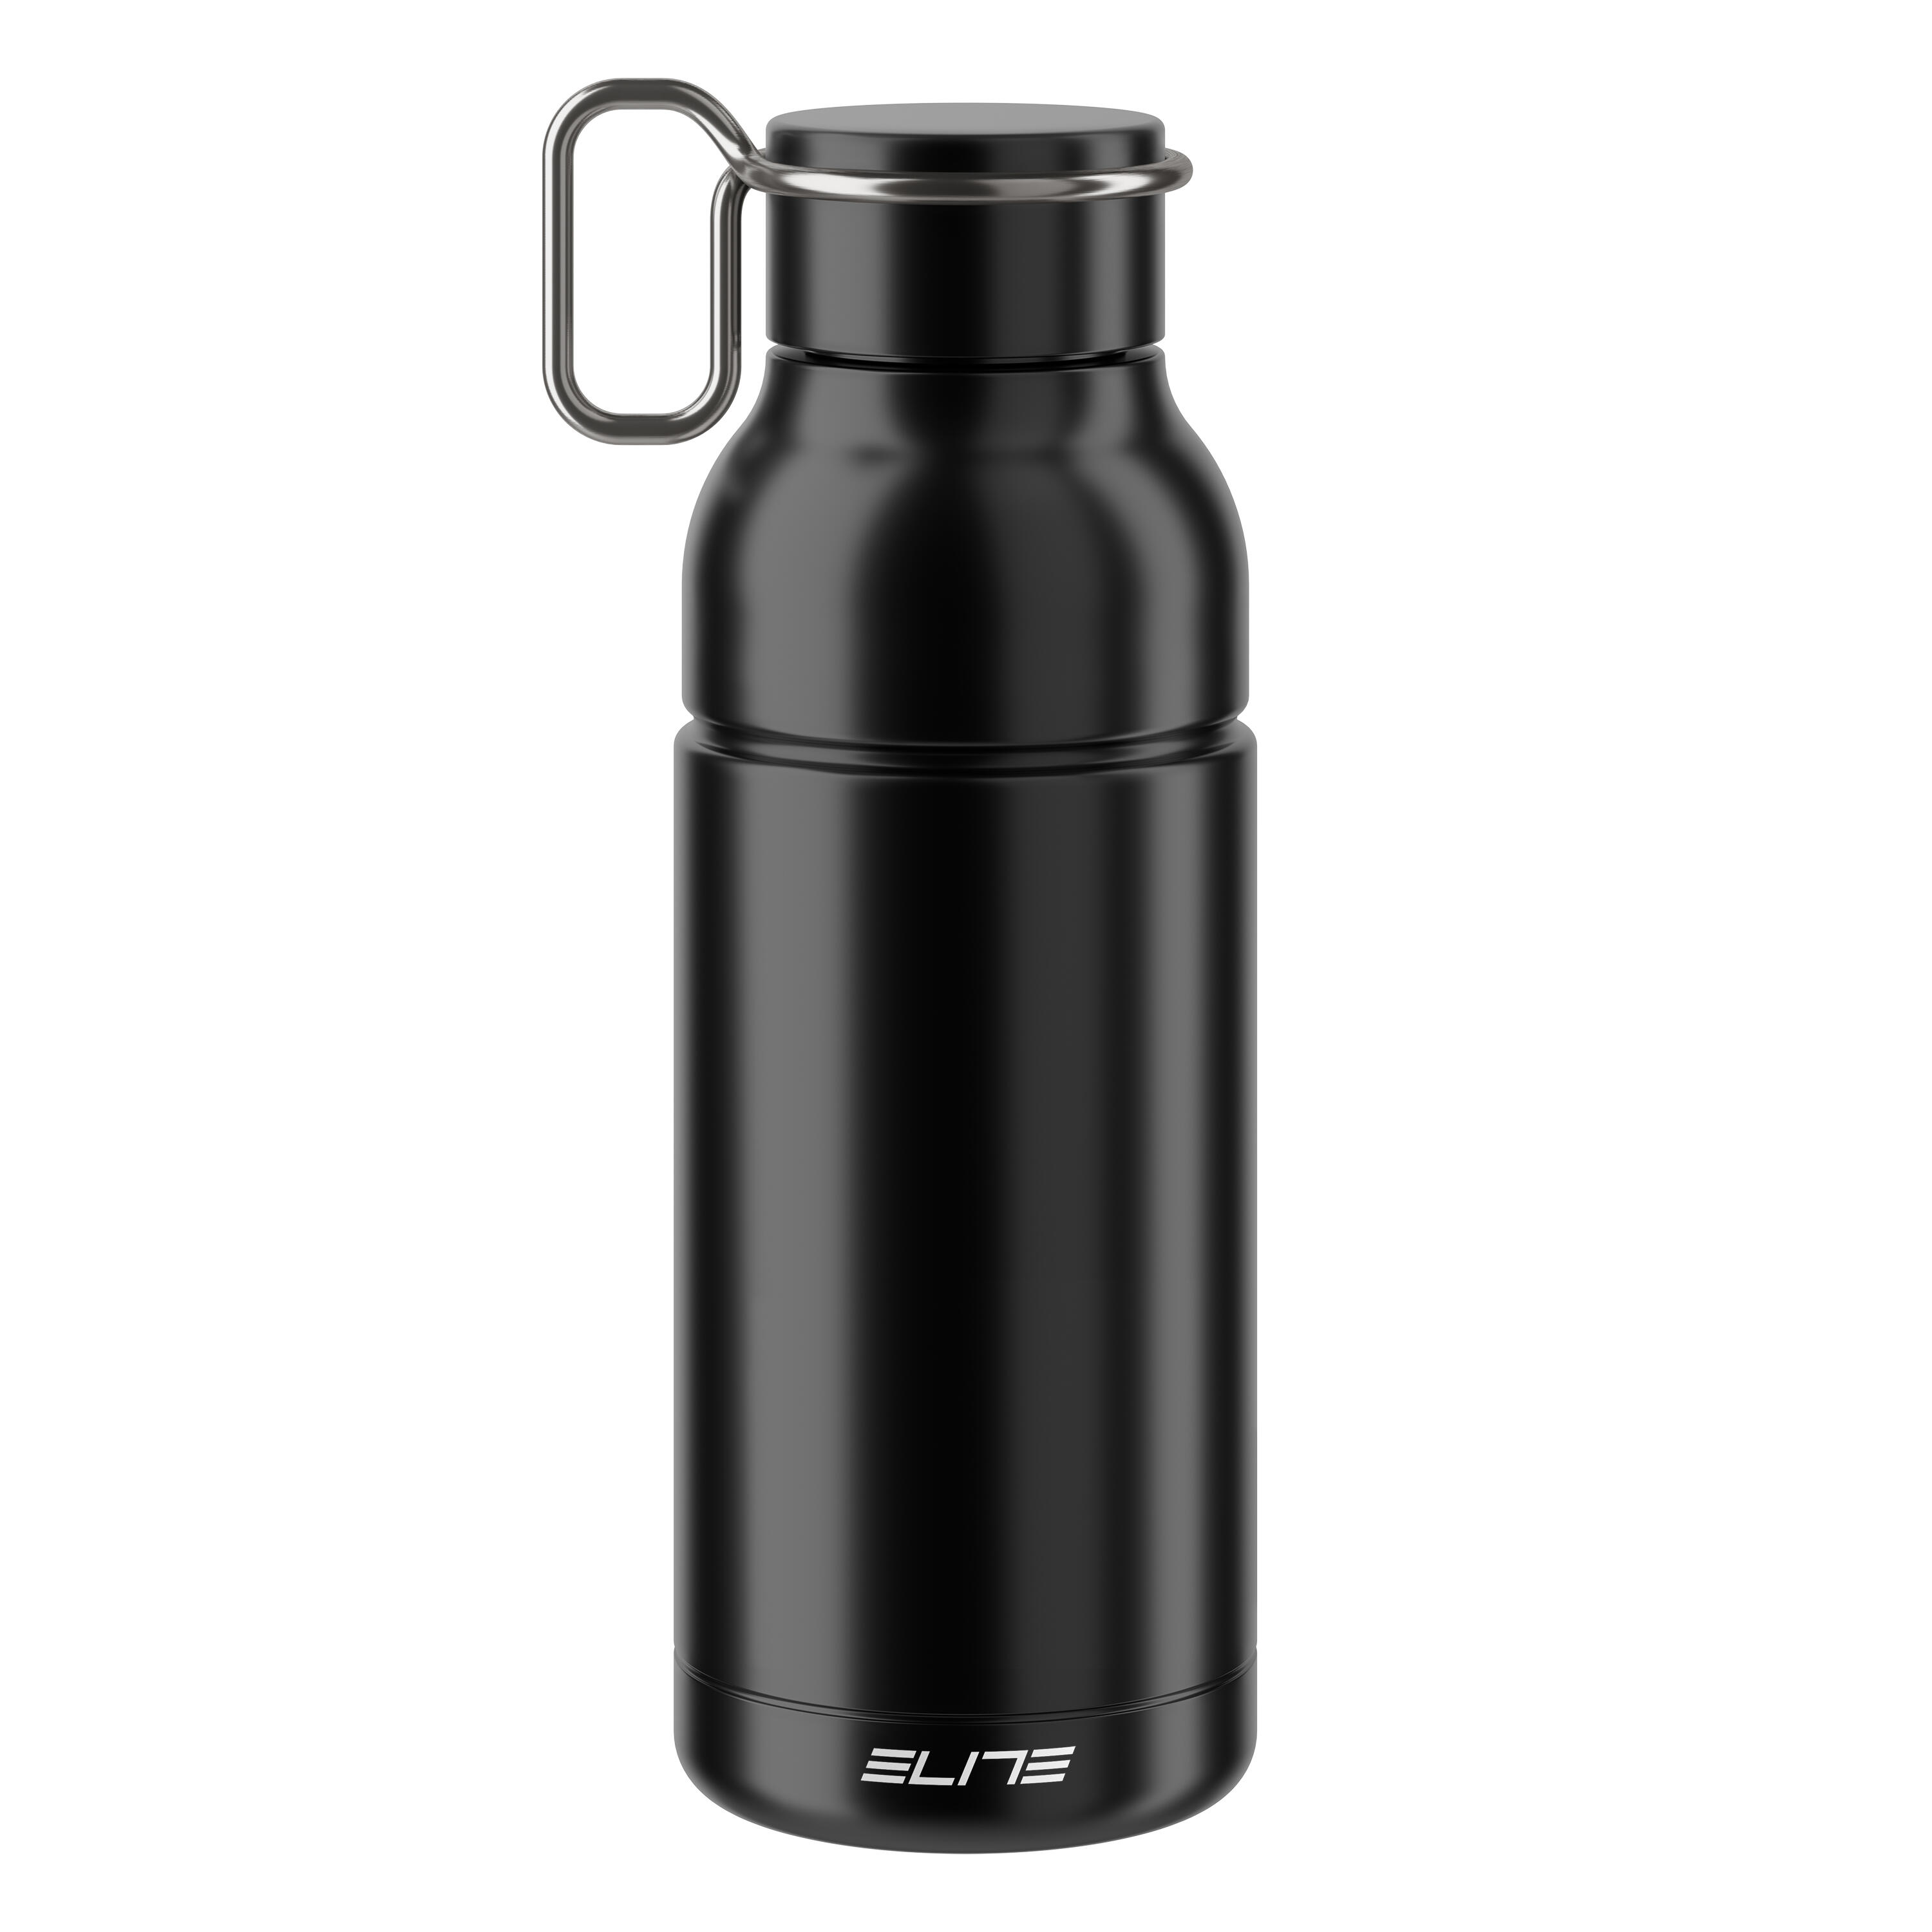 Stainless Steel Cycling Water Bottle 650 ml Mia - Black 2/4